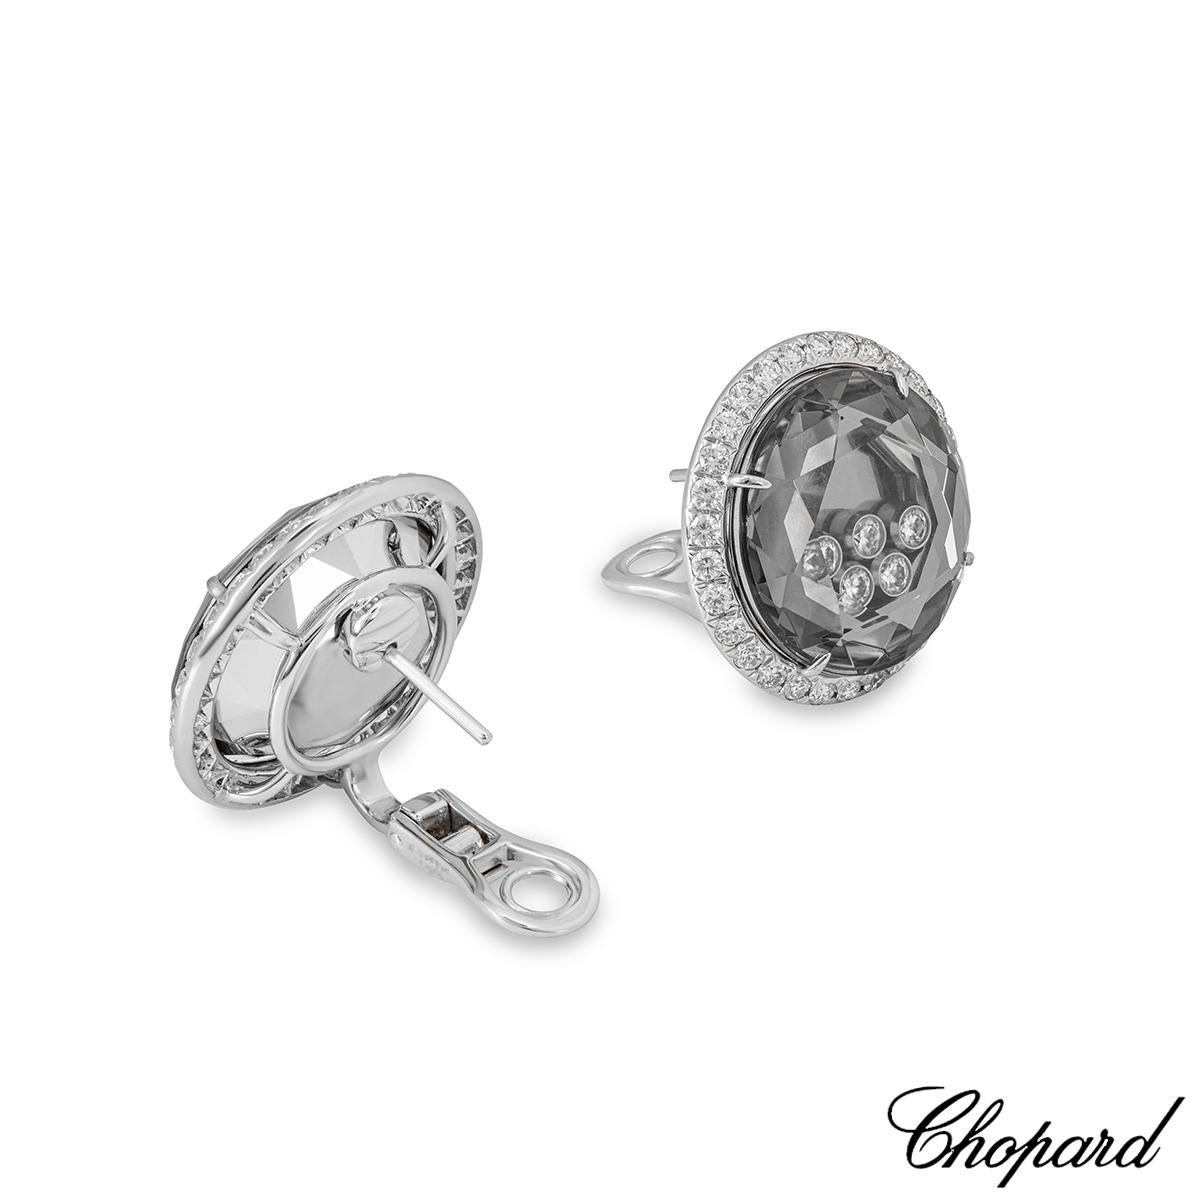 Round Cut Chopard White Gold Happy Diamonds Earrings 84/6169-1001 For Sale